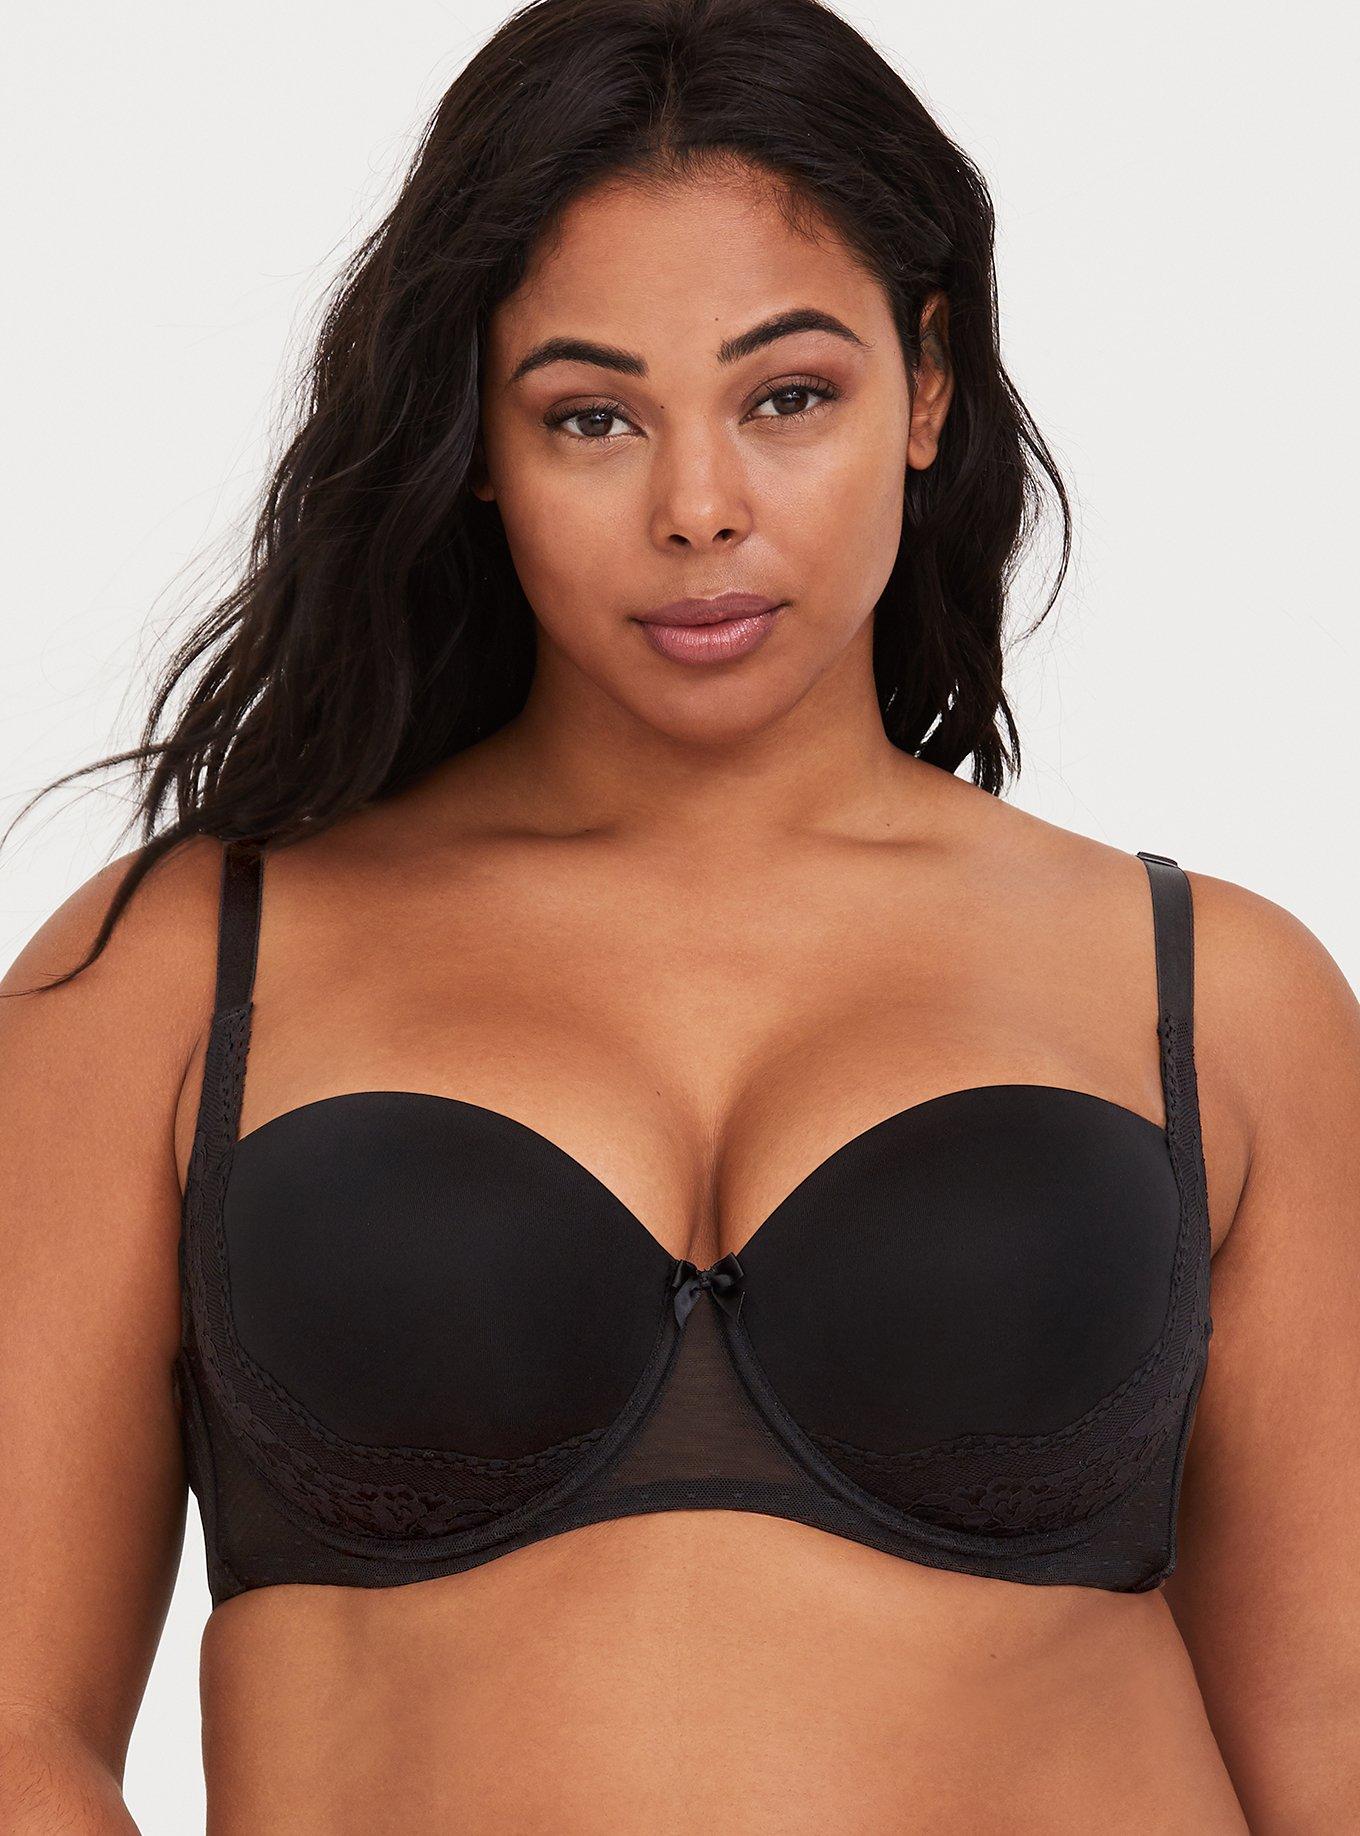 TORRID BRA HAUL : I BOUGHT THE WRONG SIZE !!! SEE WHAT HAPPENED +